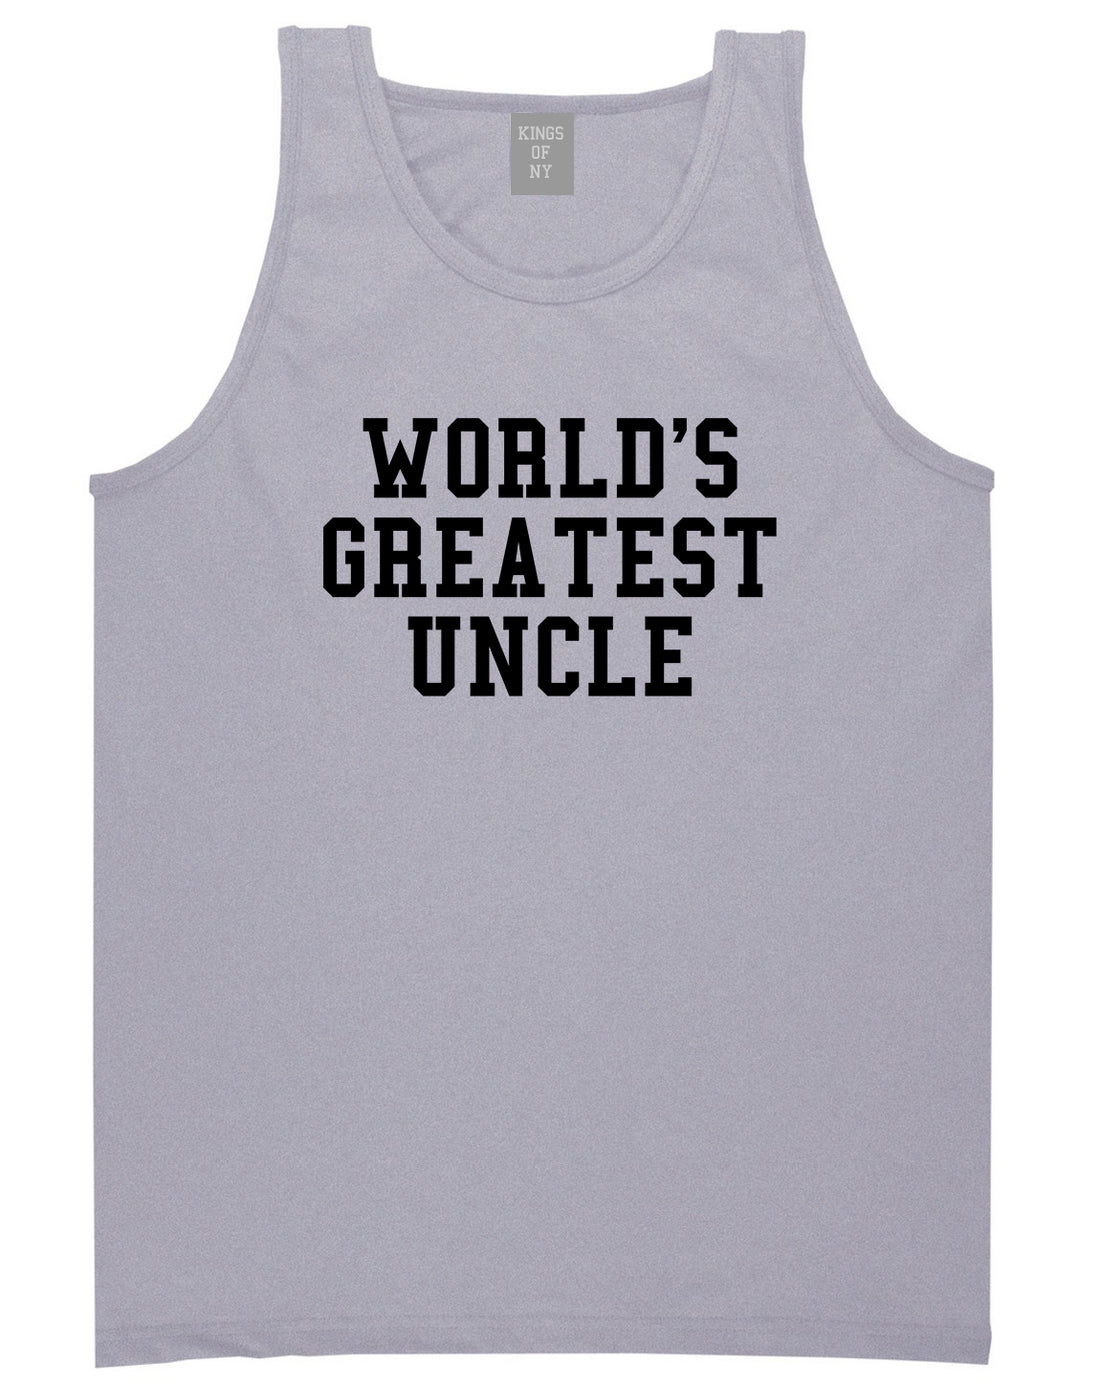 Worlds Greatest Uncle Birthday Gift Mens Tank Top T-Shirt Grey